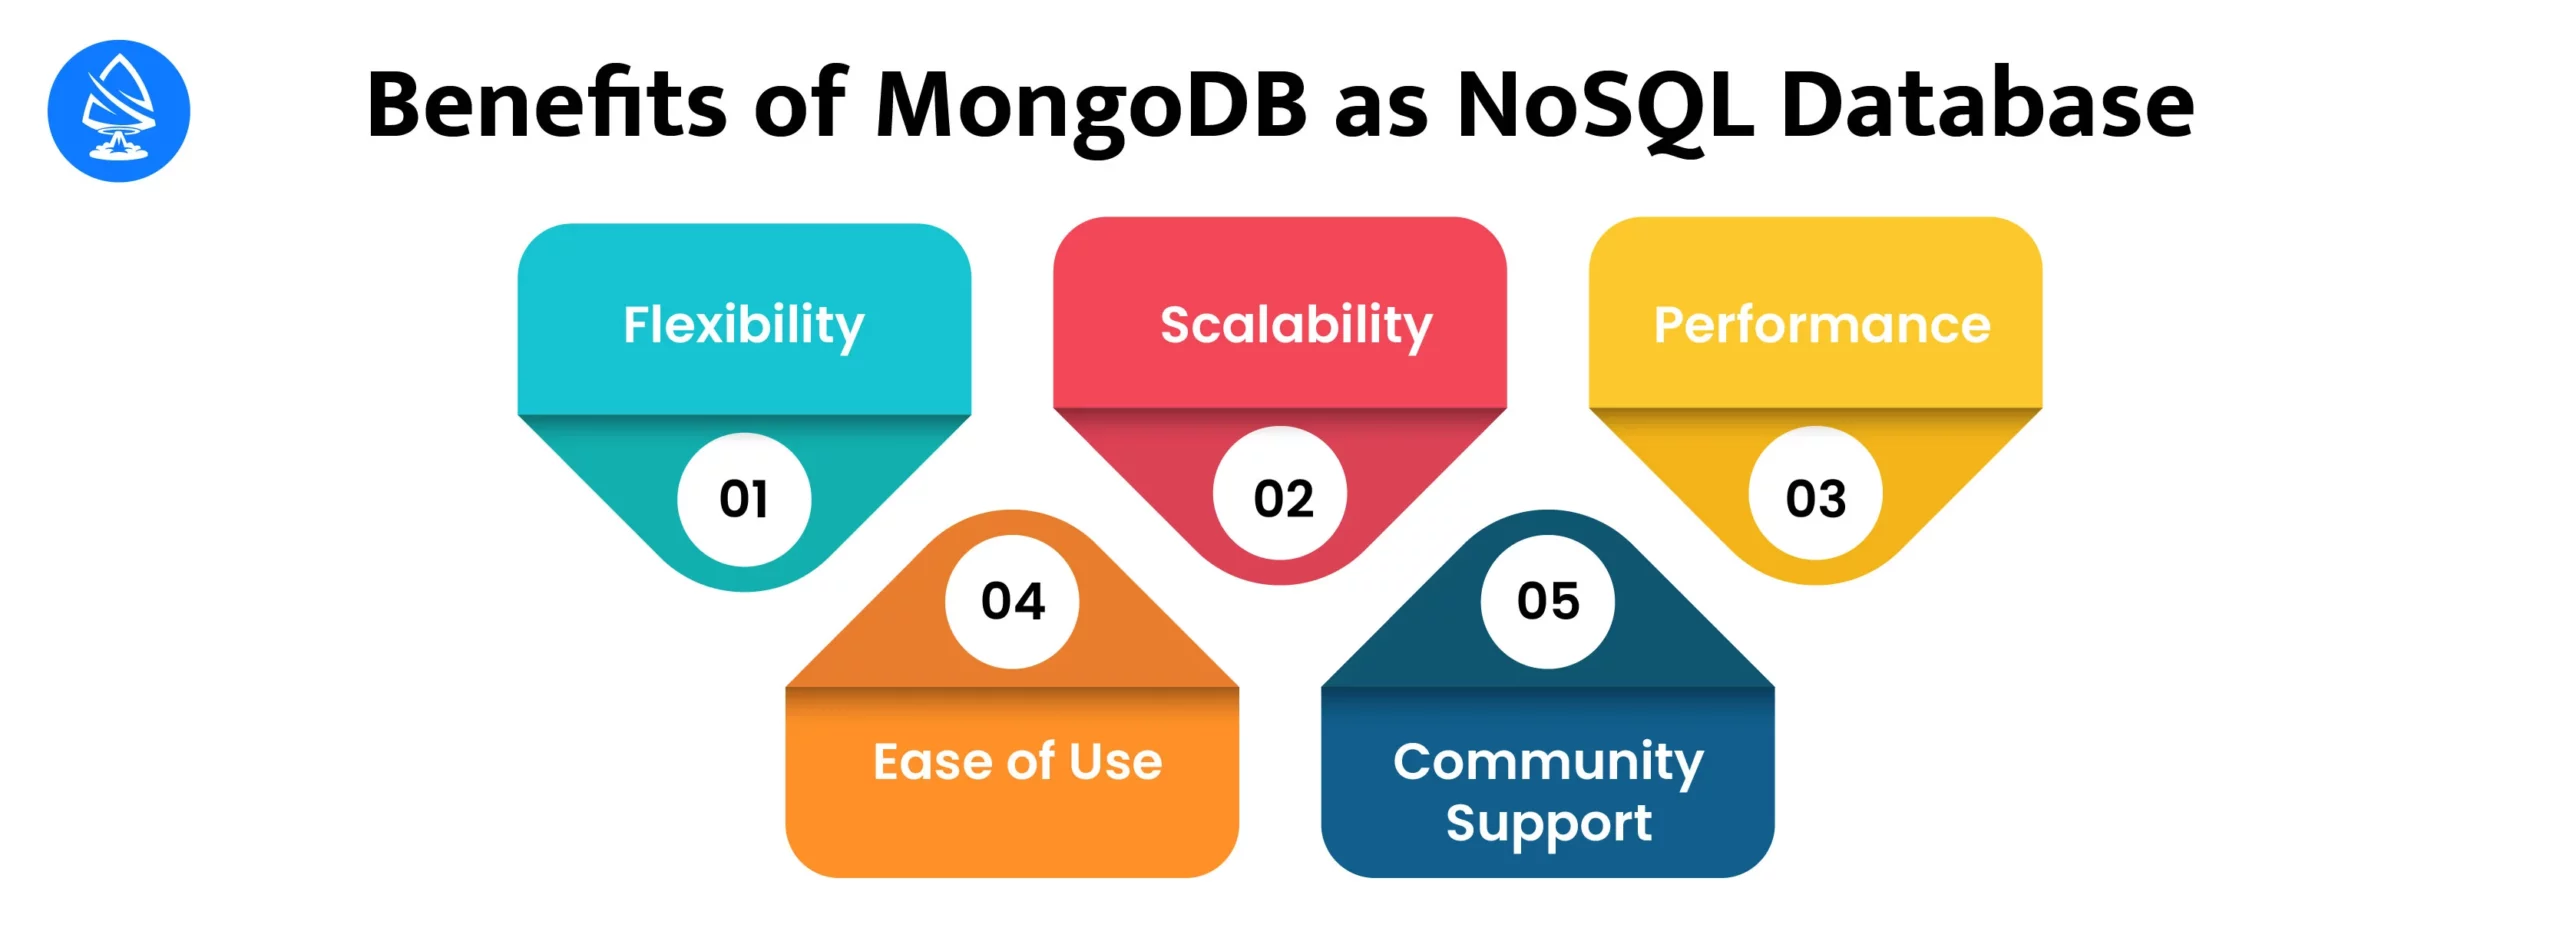 Benefits of MongoDB as a NoSQL database